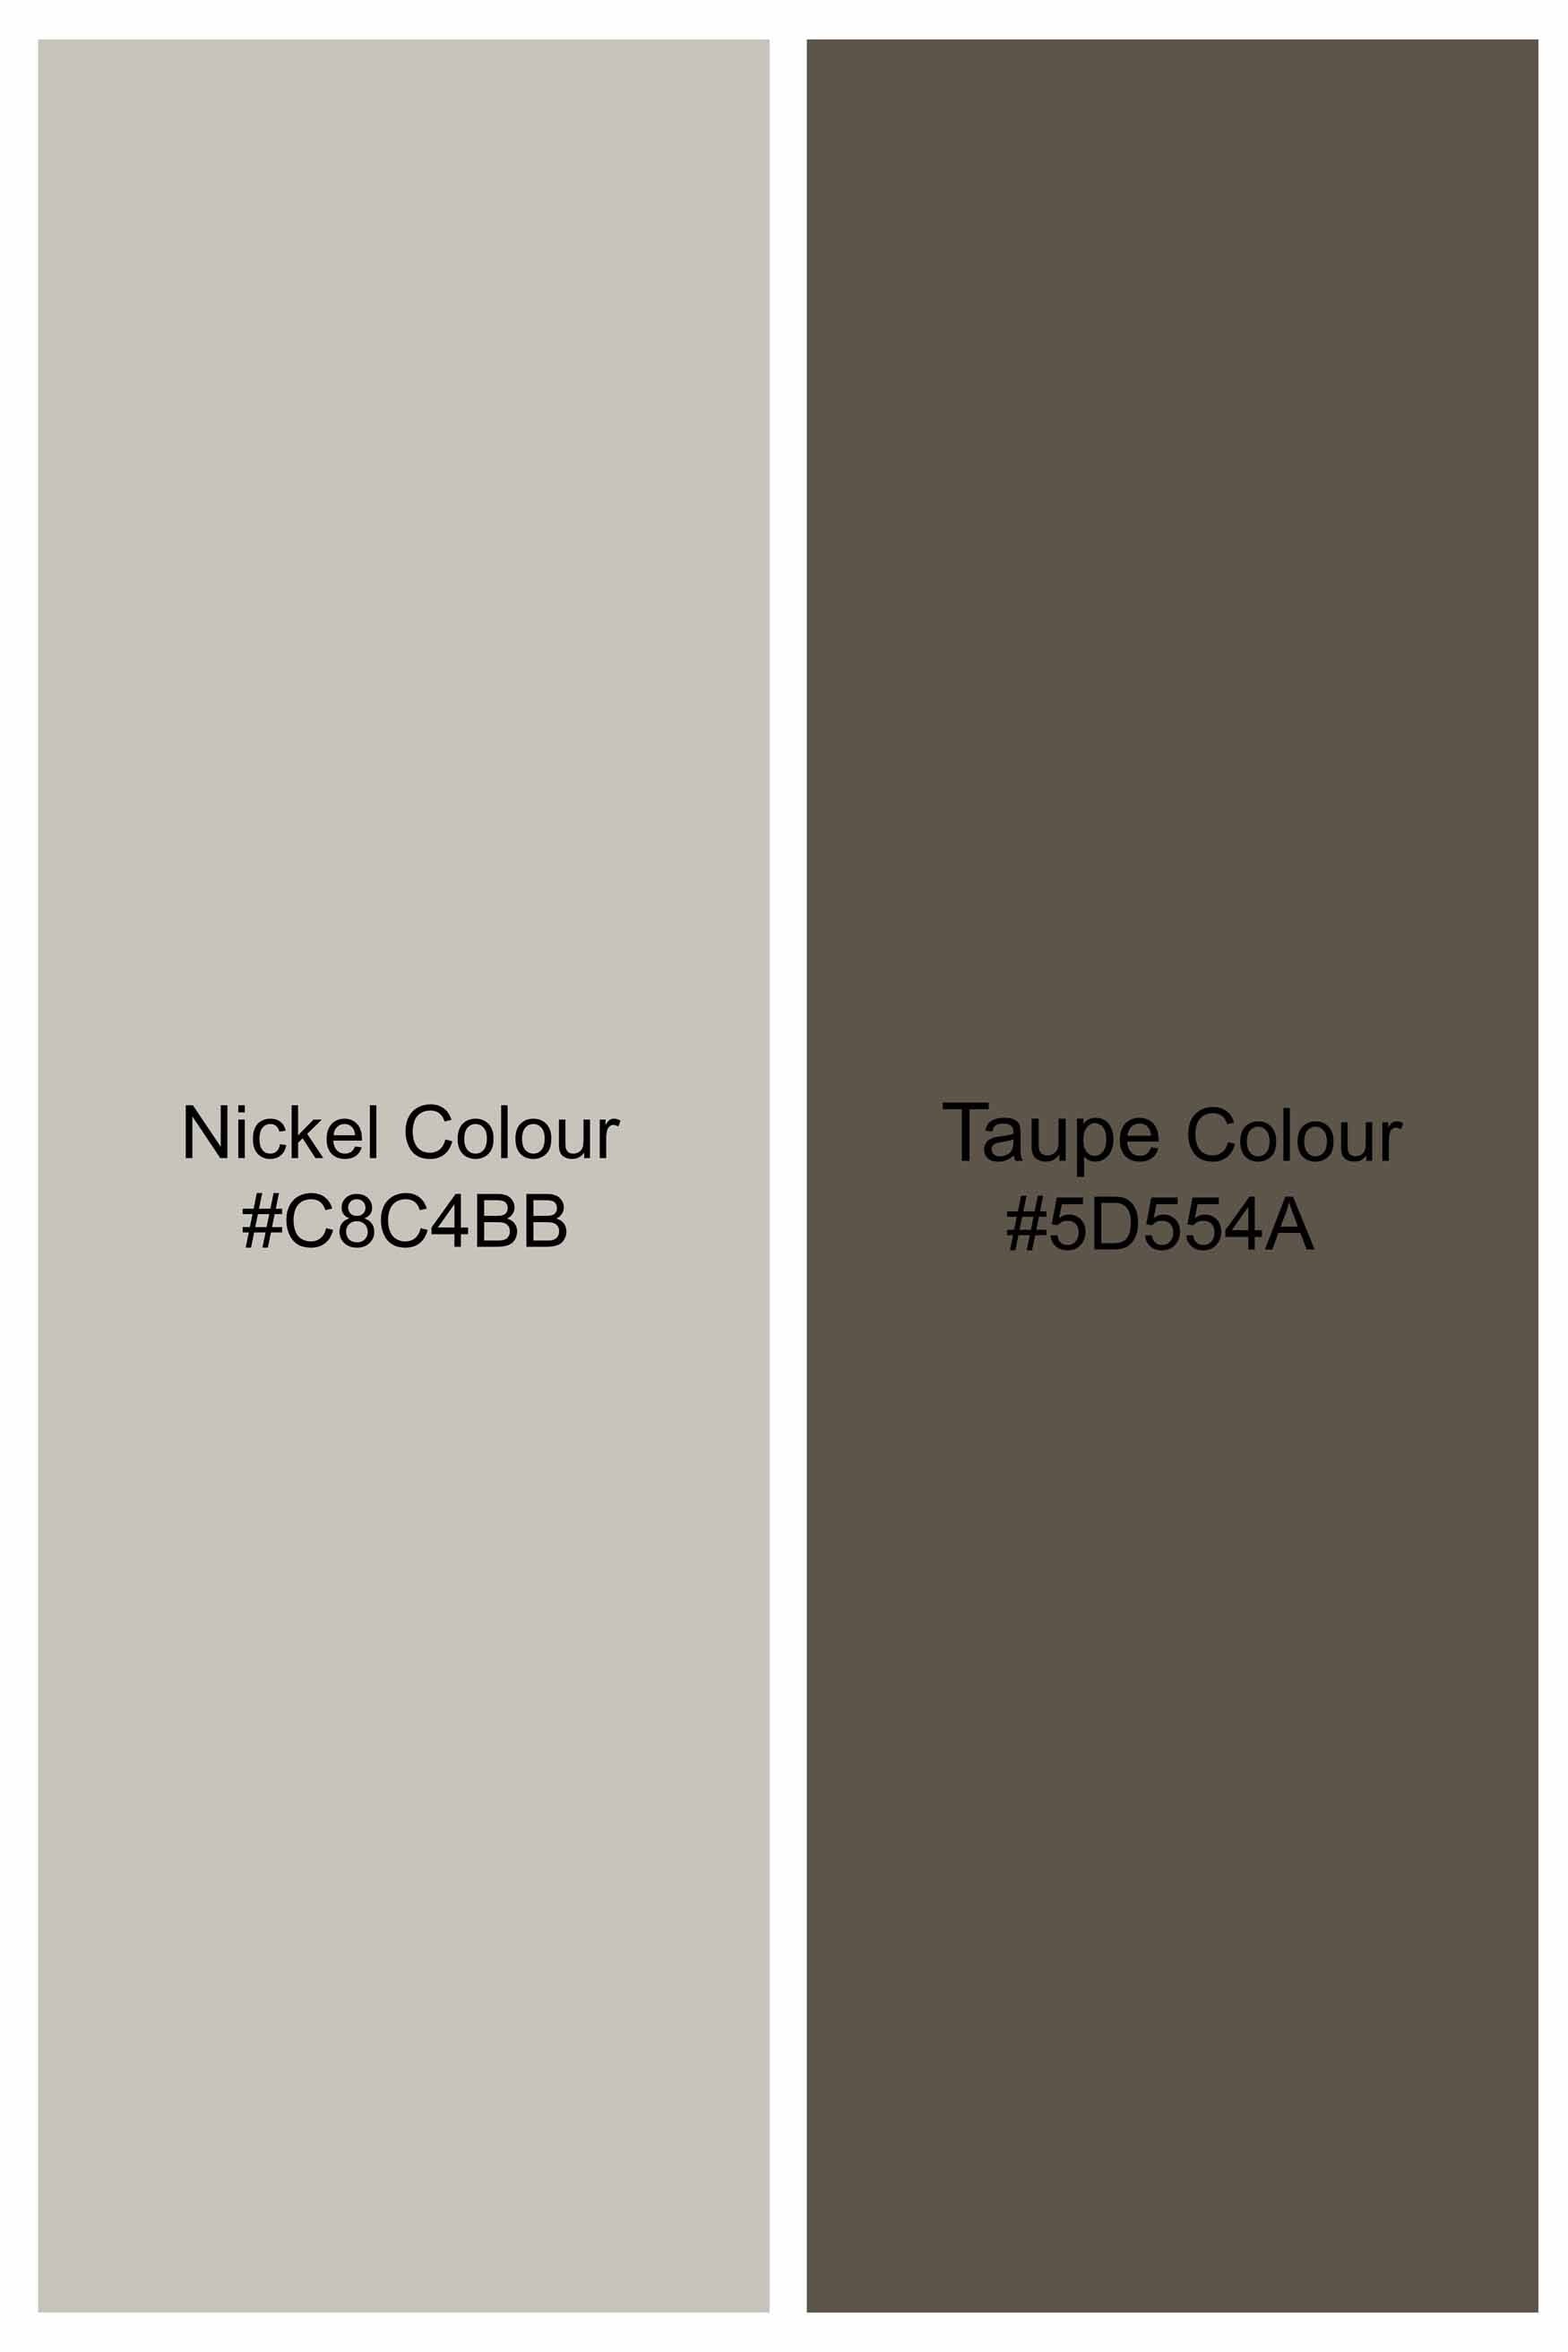 Nickel Gray and Taupe Brown Super Soft Premium Cotton Shirt